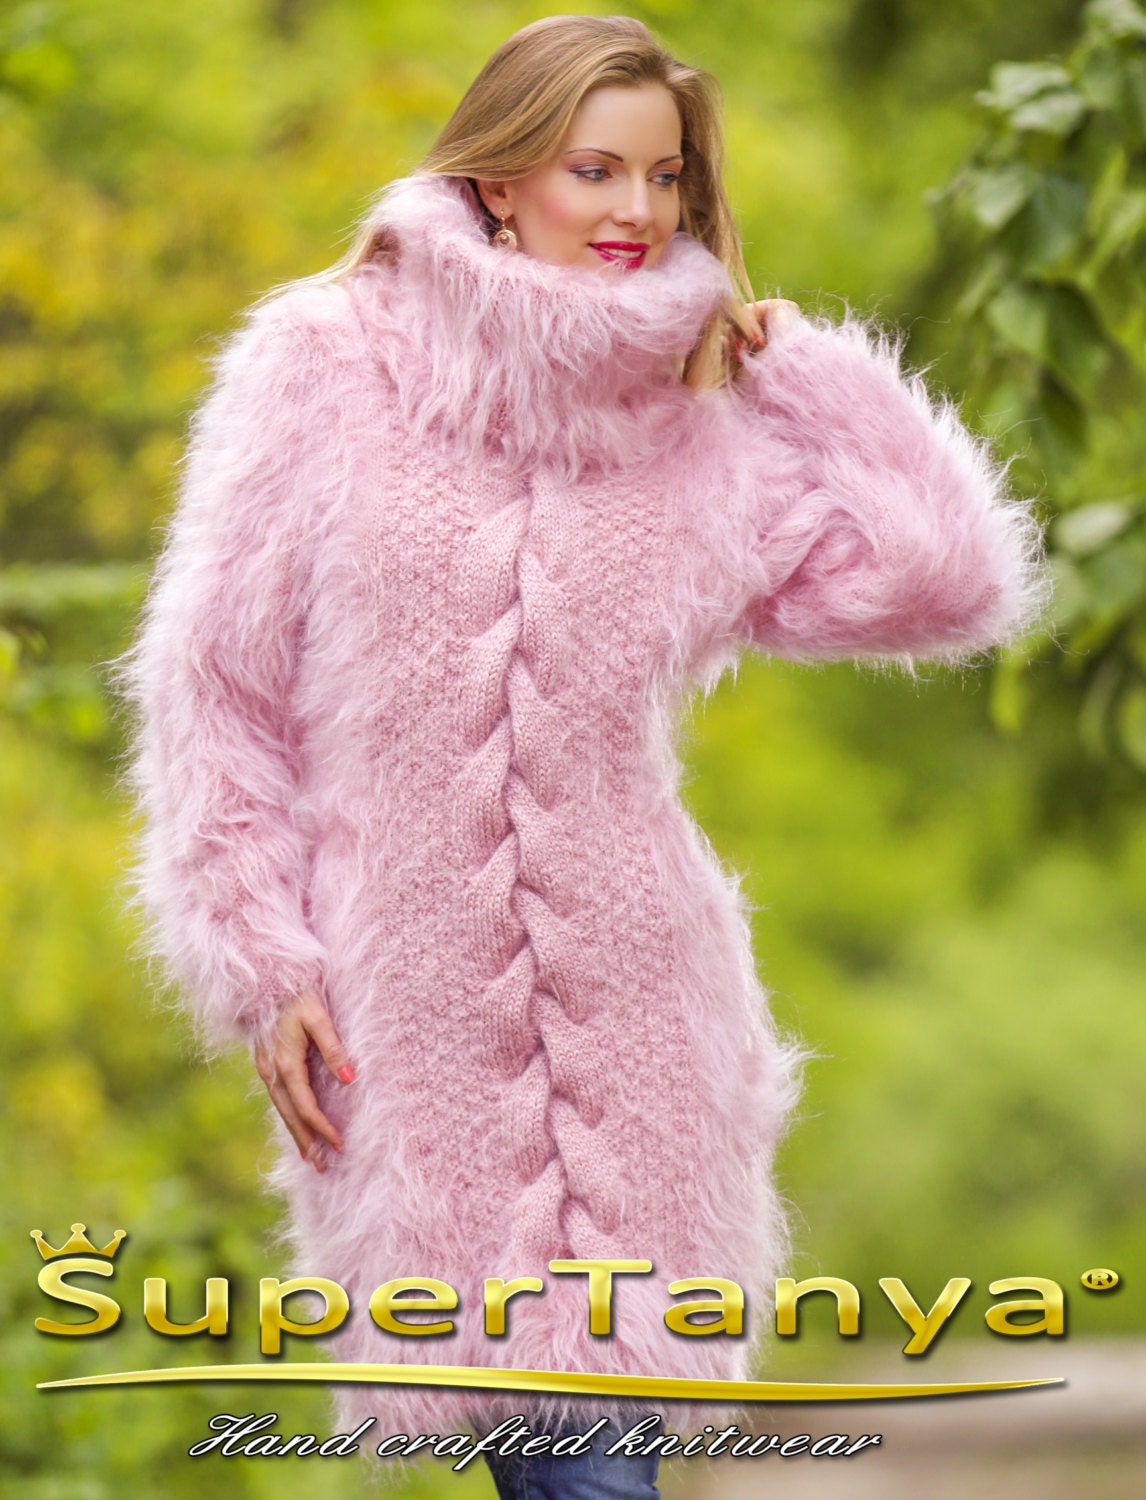 One of a kind fuzzy hand knitted pink mohair sweater dress